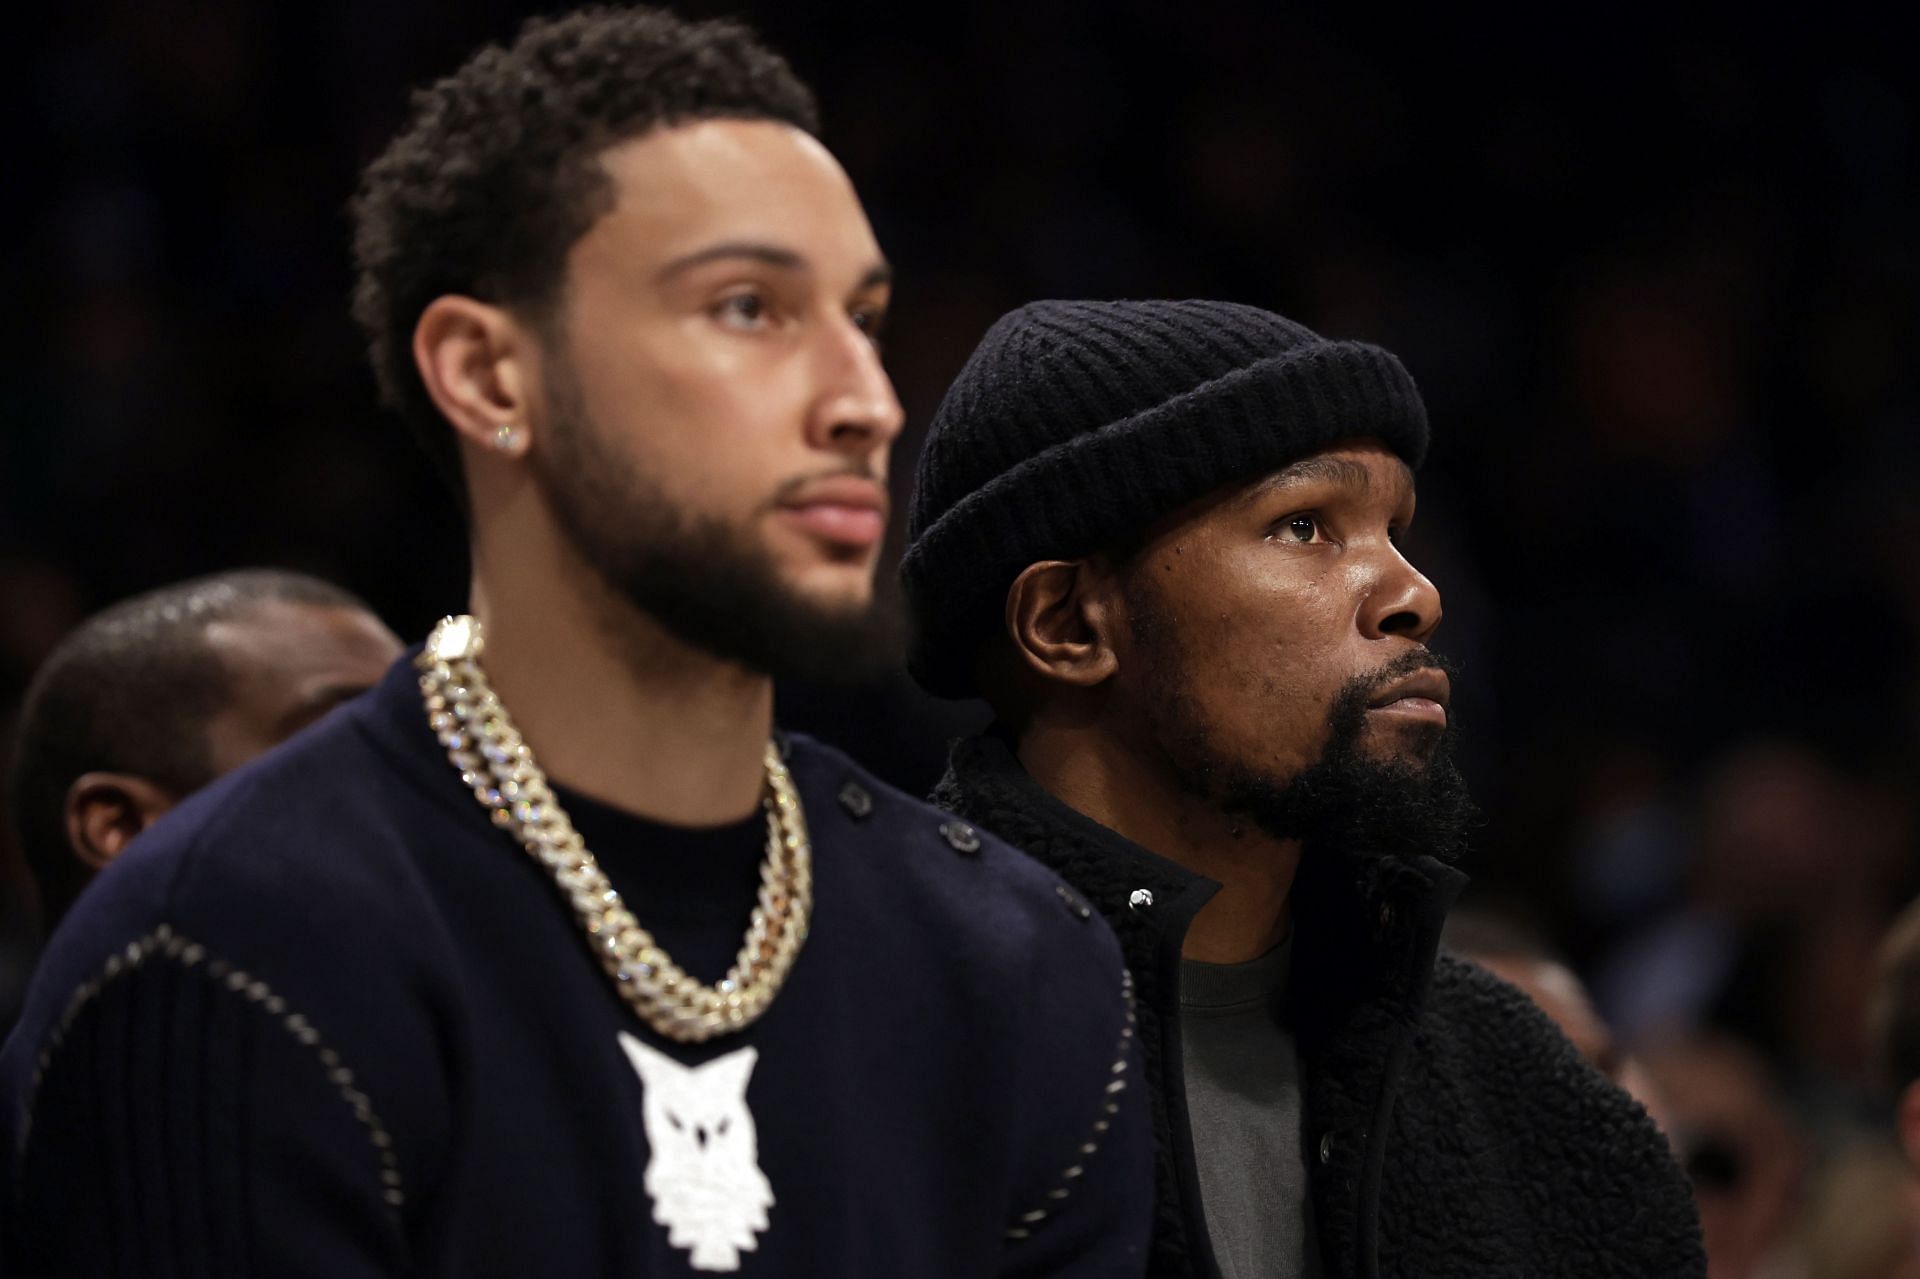 Ben Simmons and Kevin Durant look on at the Brooklyn Nets game